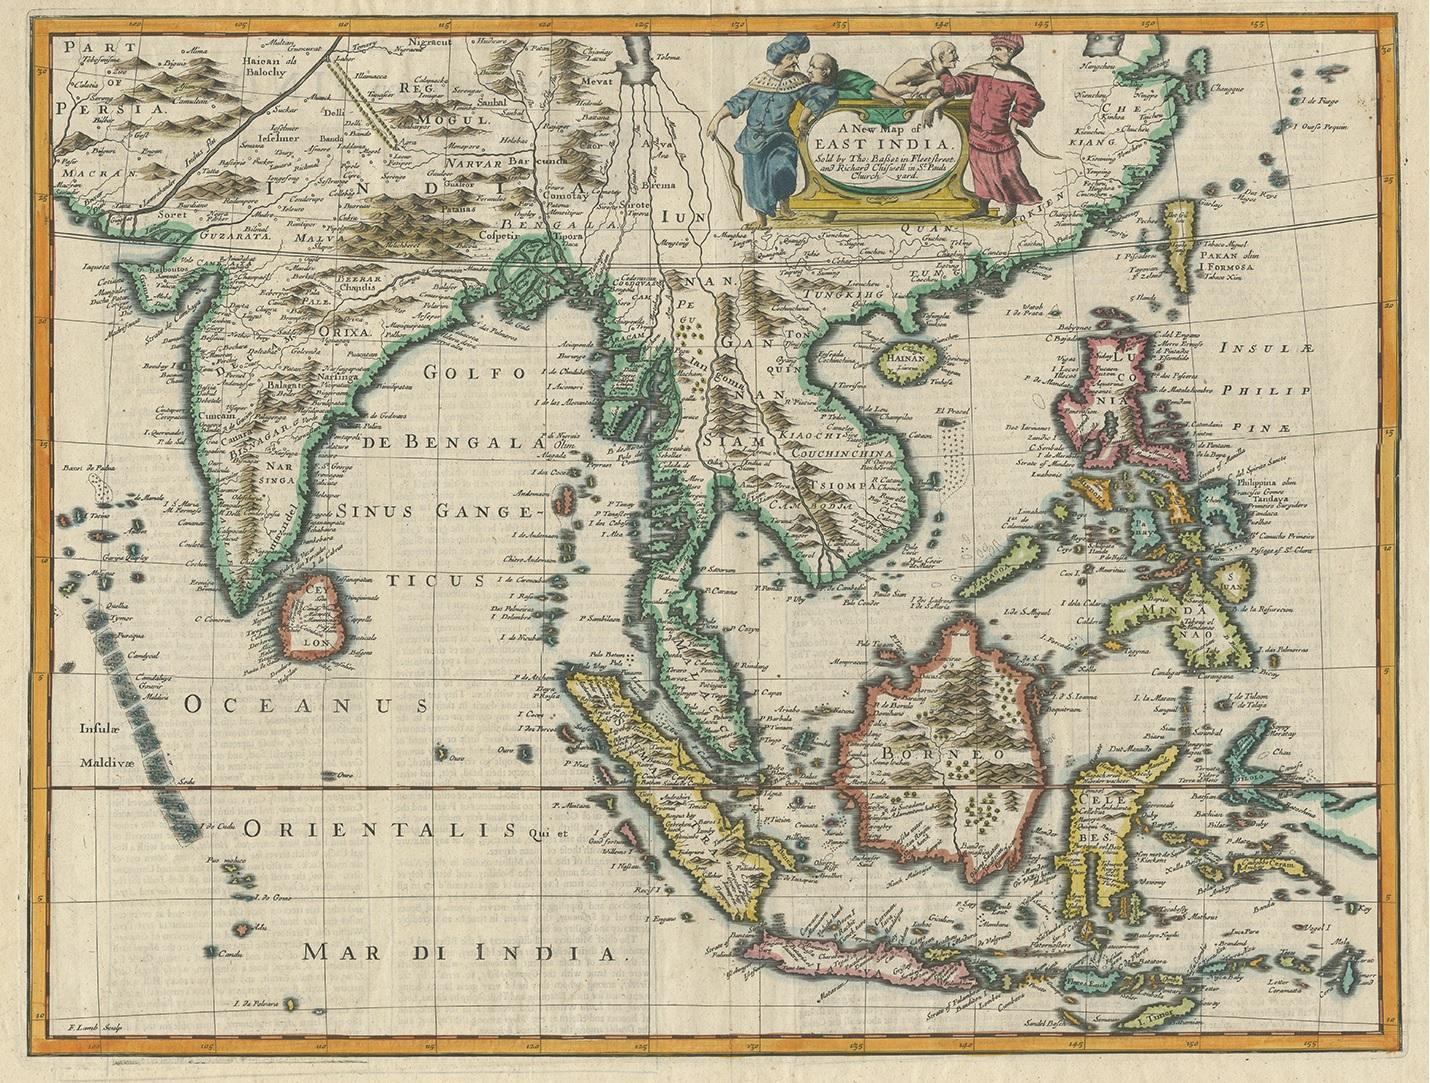 Antique map titled 'A New Map of East India'. John Speed's map of Southeast Asia, China, Taiwan and part of India, which was engraved by Francis Lamb and first appeared in the enlarged edition of Speed's world atlas in 1676. The map covers Southeast